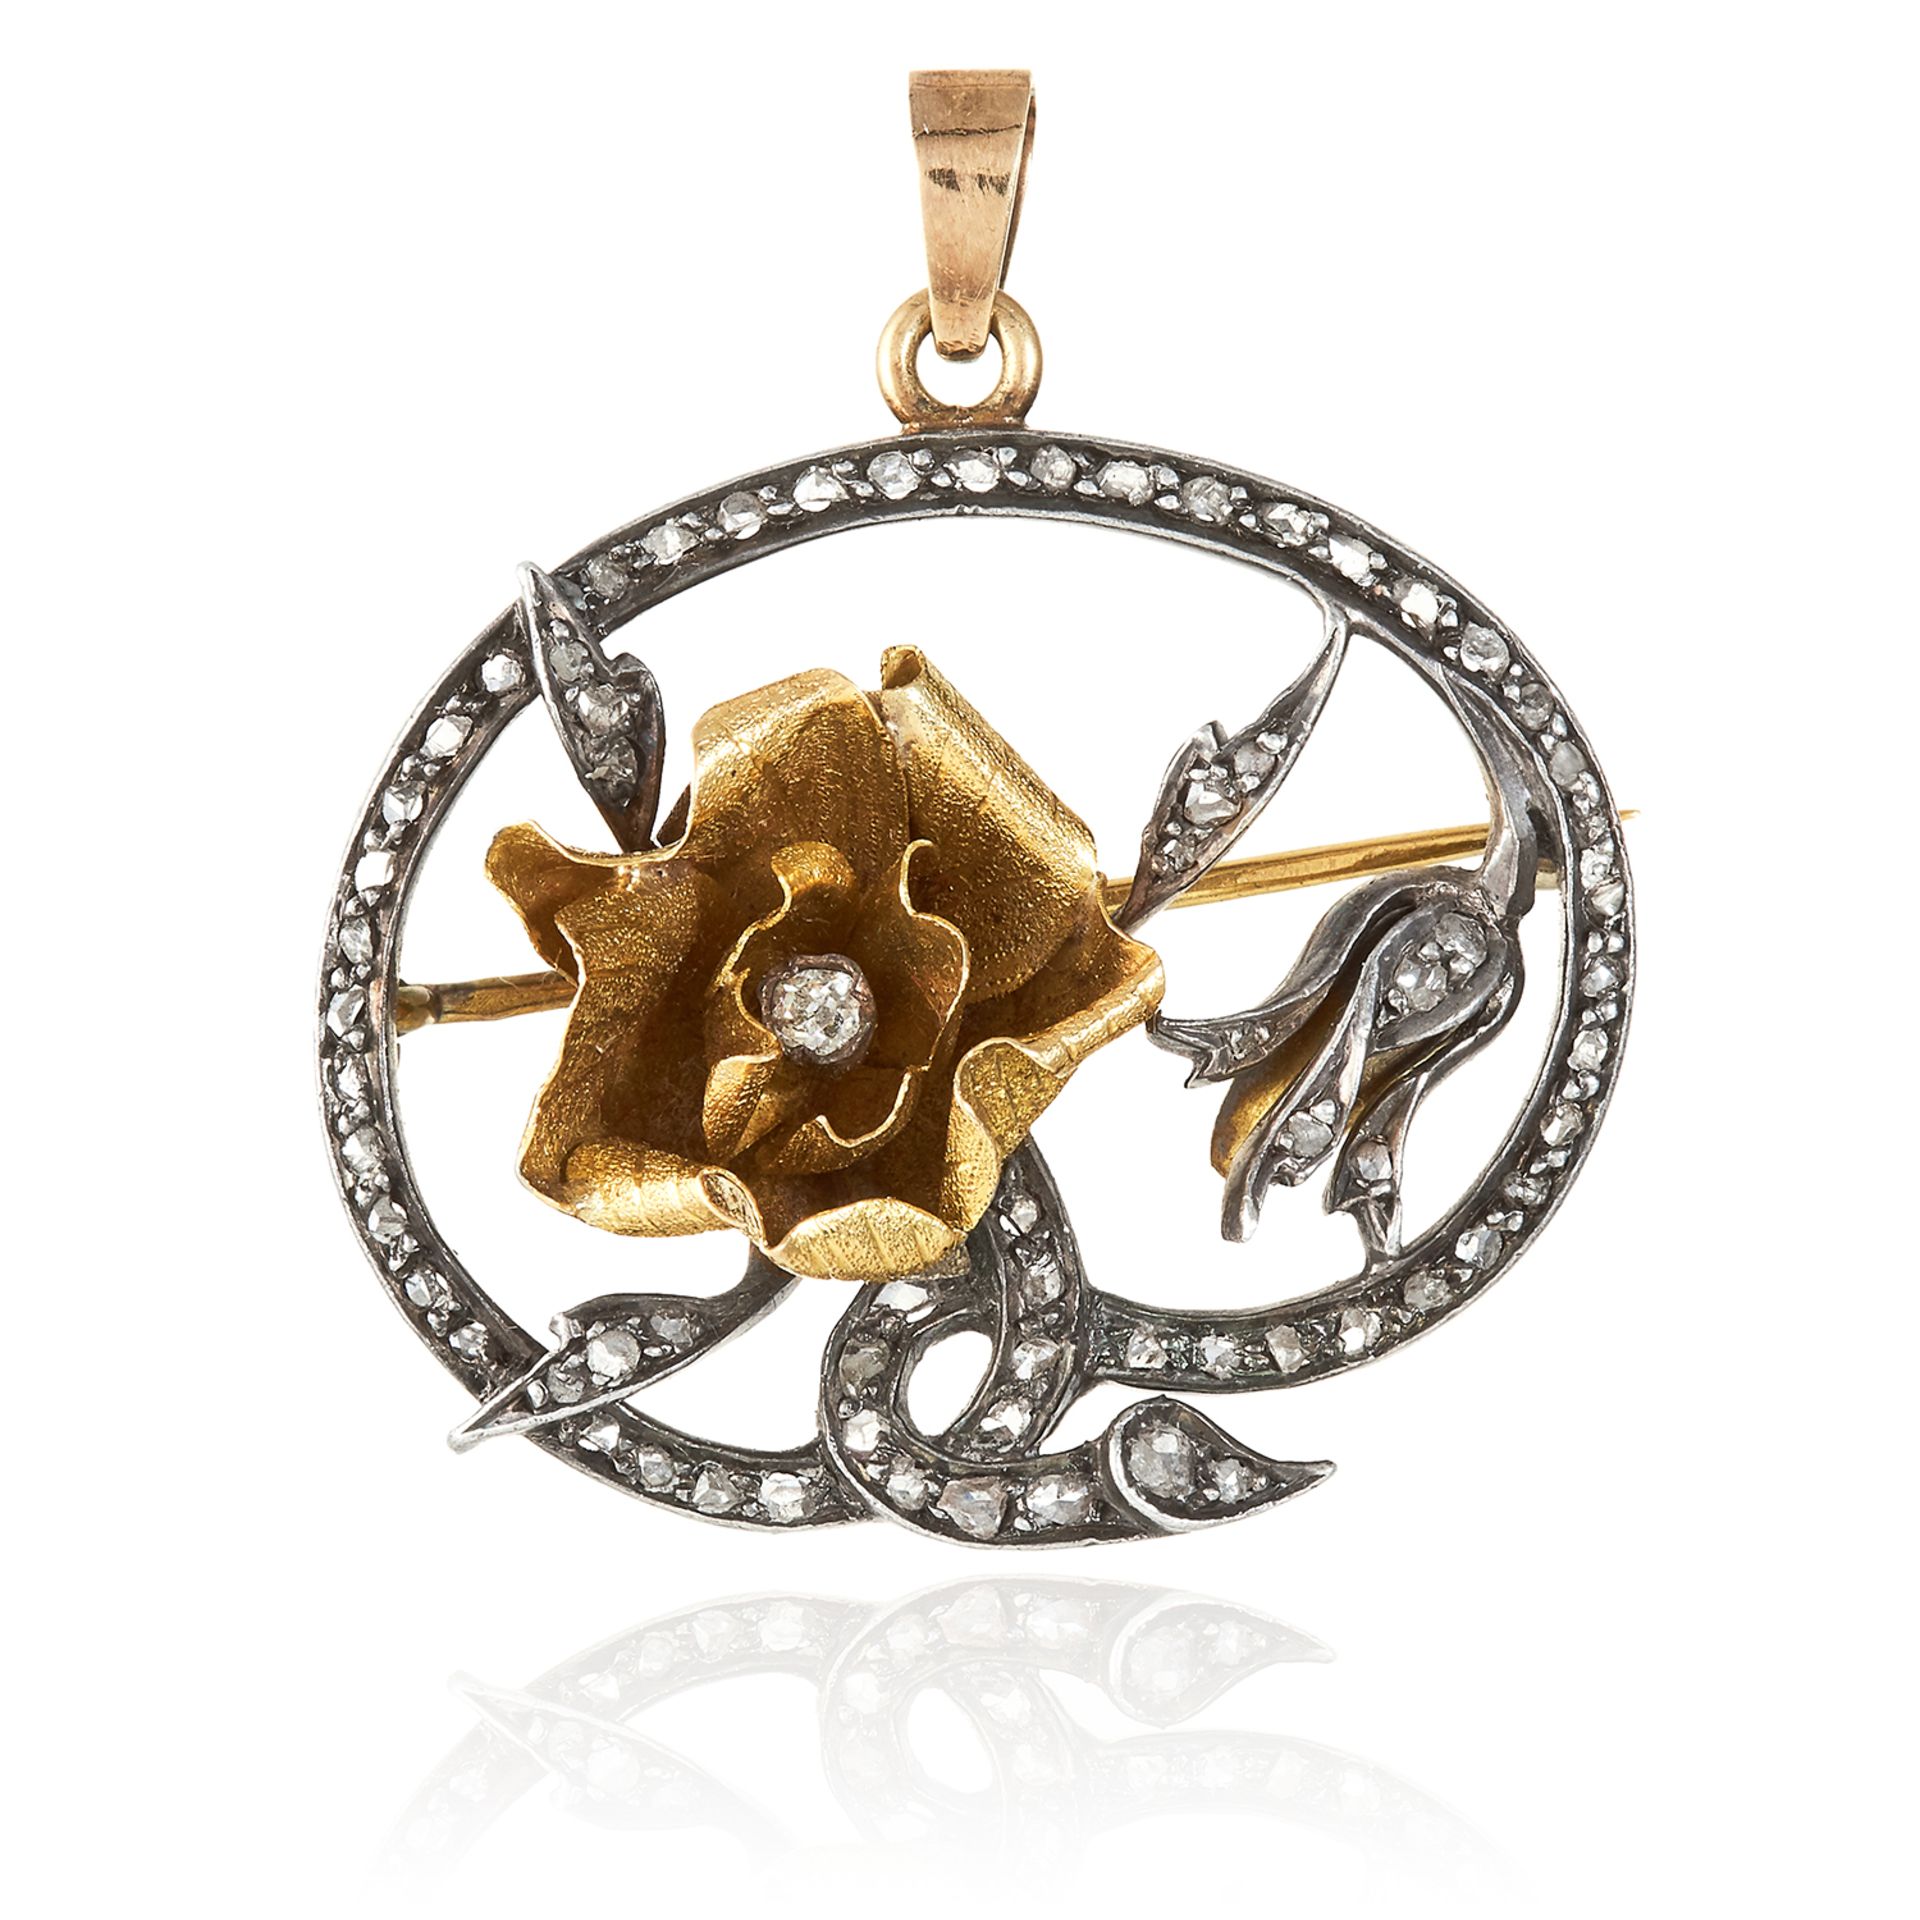 AN ANTIQUE DIAMOND FLOWER BROOCH, 19TH CENTURY in high carat yellow gold or silver, French marks,